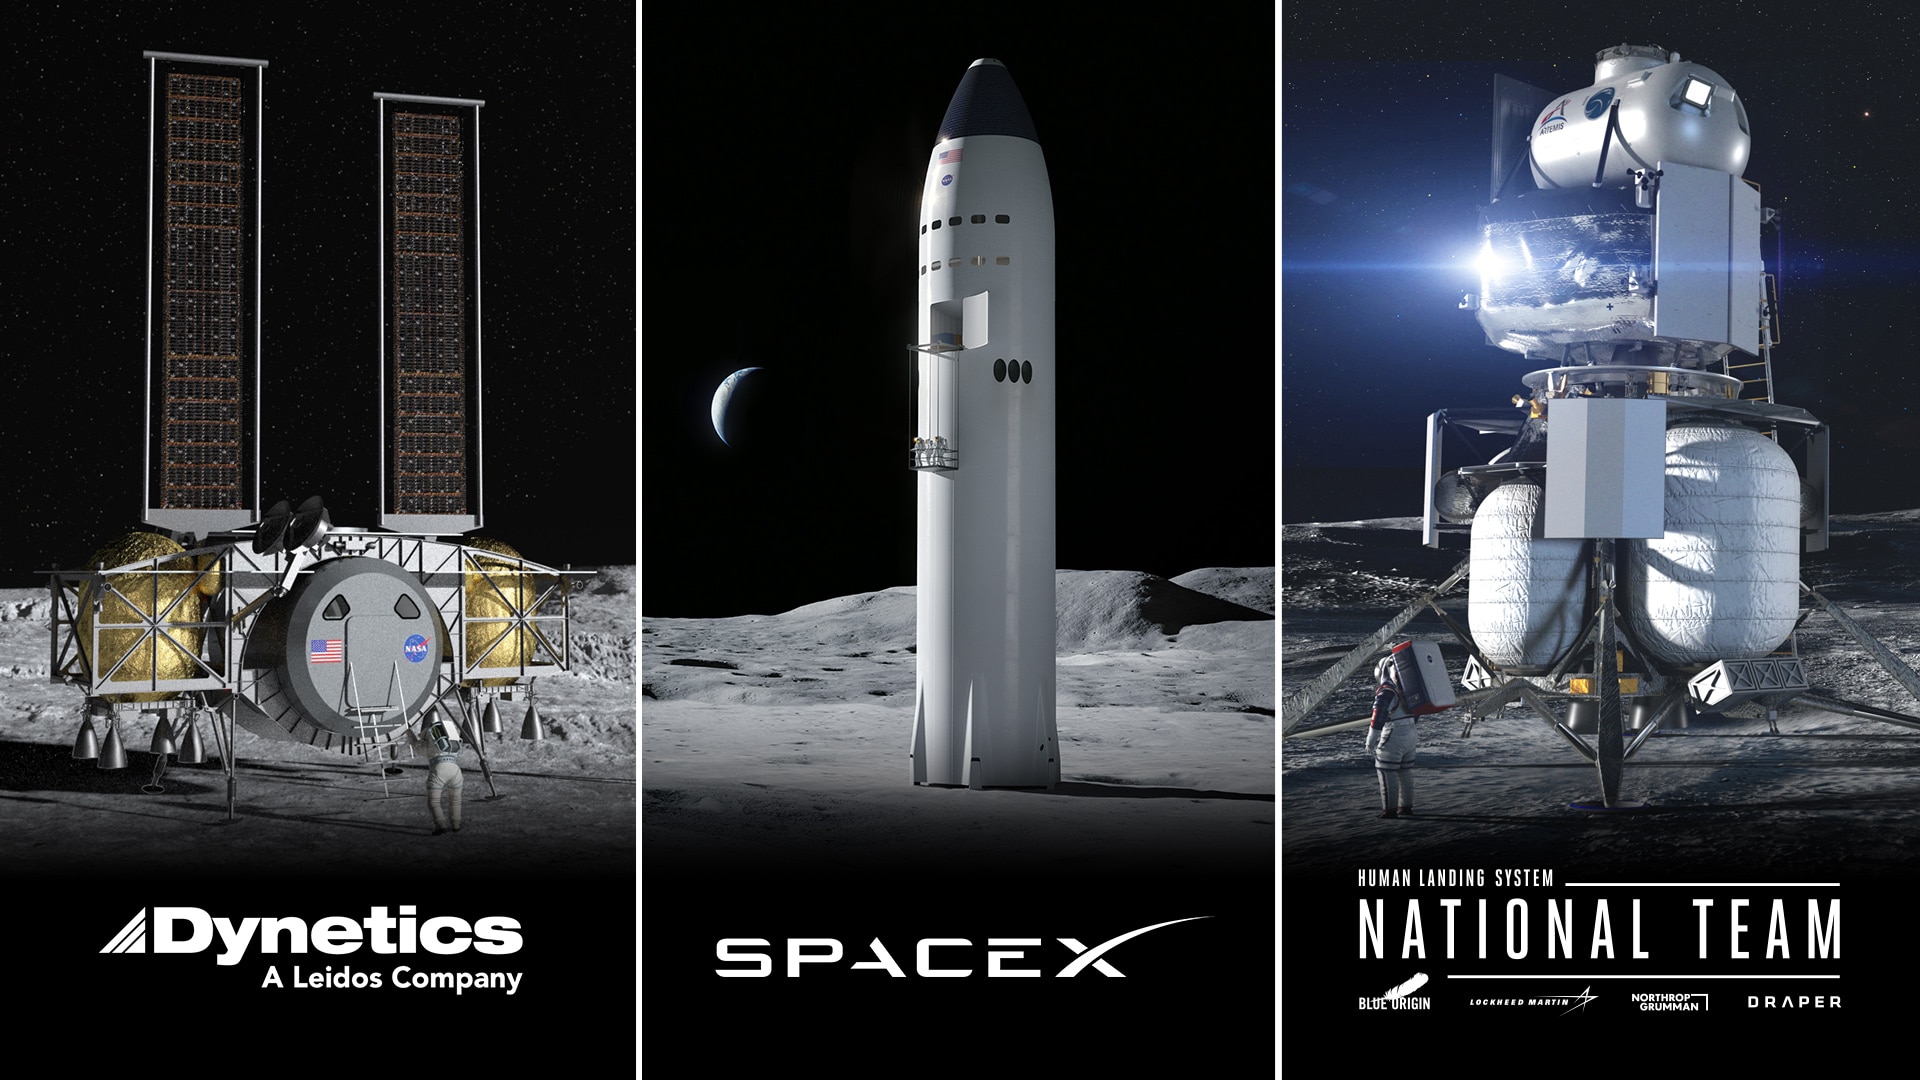 SpaceX, Blue Origin and Dynetics Selected to Make Human Landers for the Moon